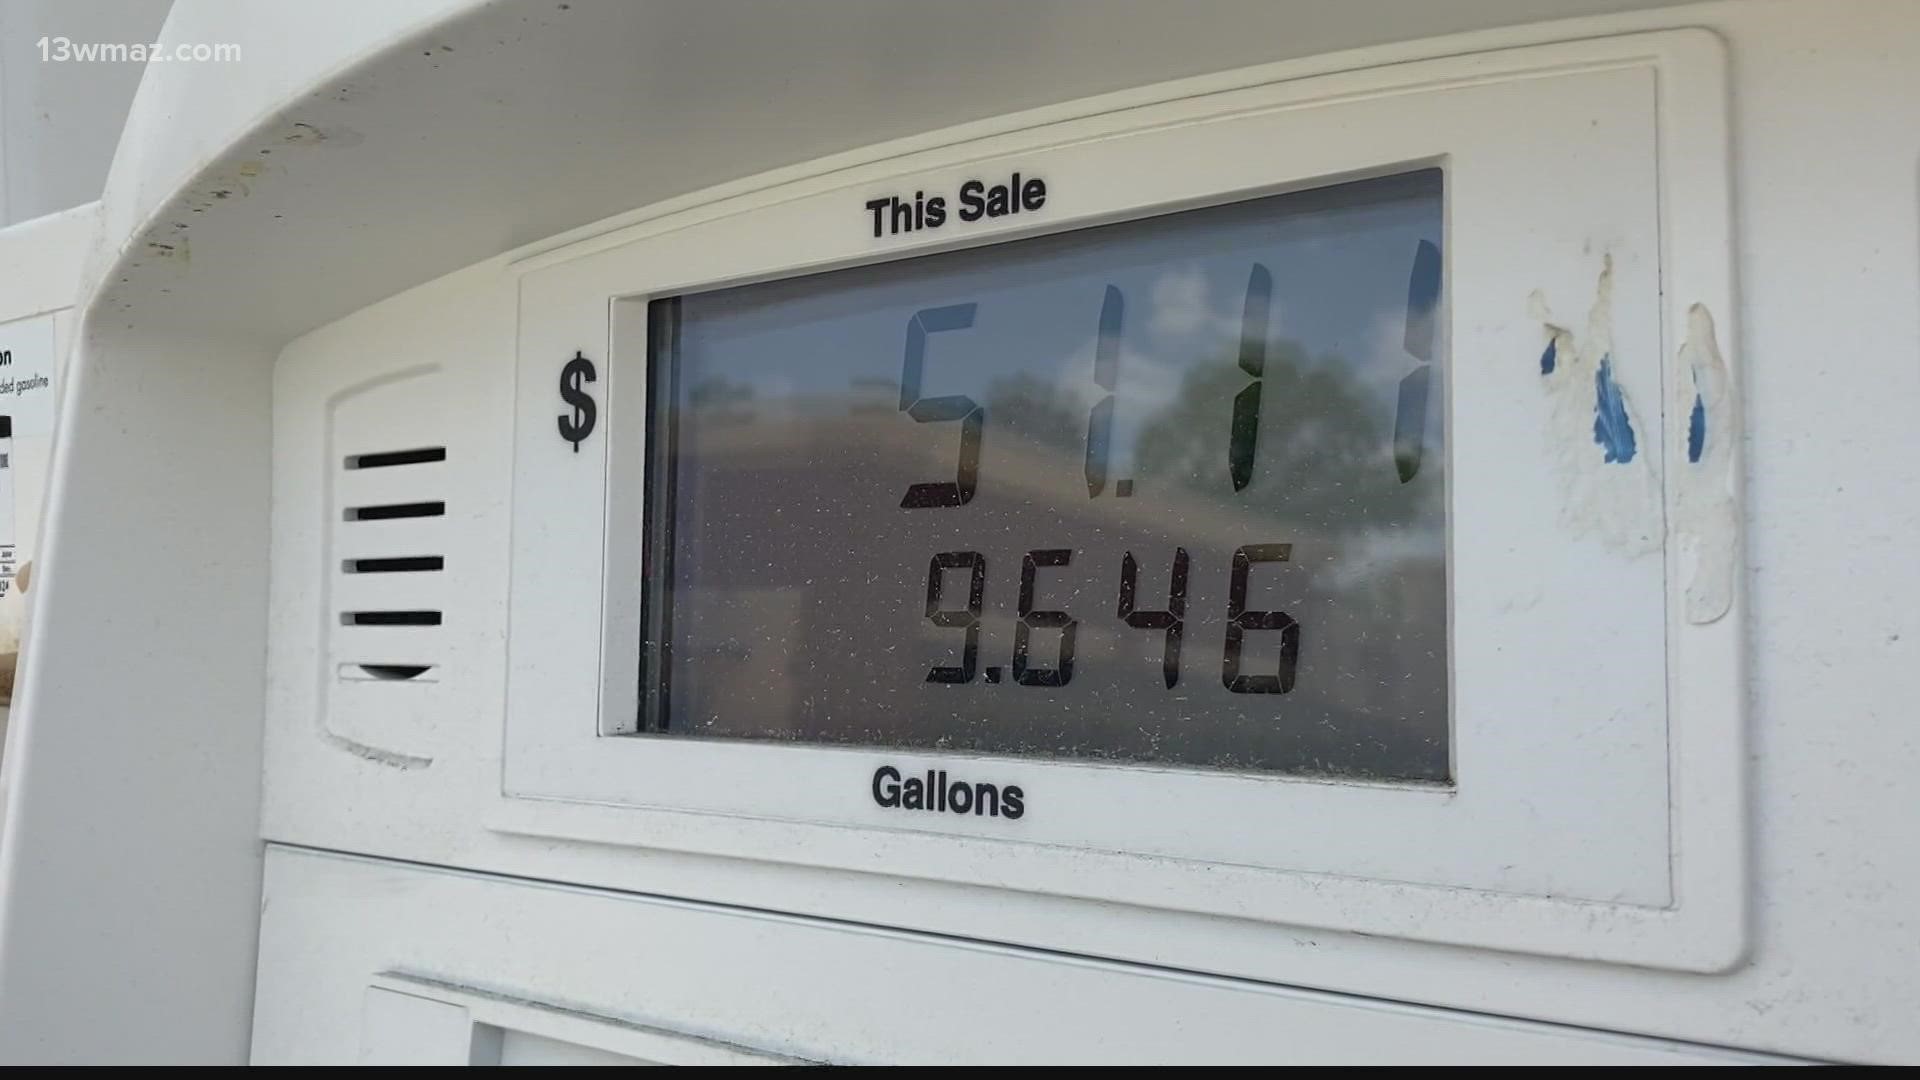 Georgia drivers should expect gas prices to stay high this summer, according to AAA's Montrae Waiters